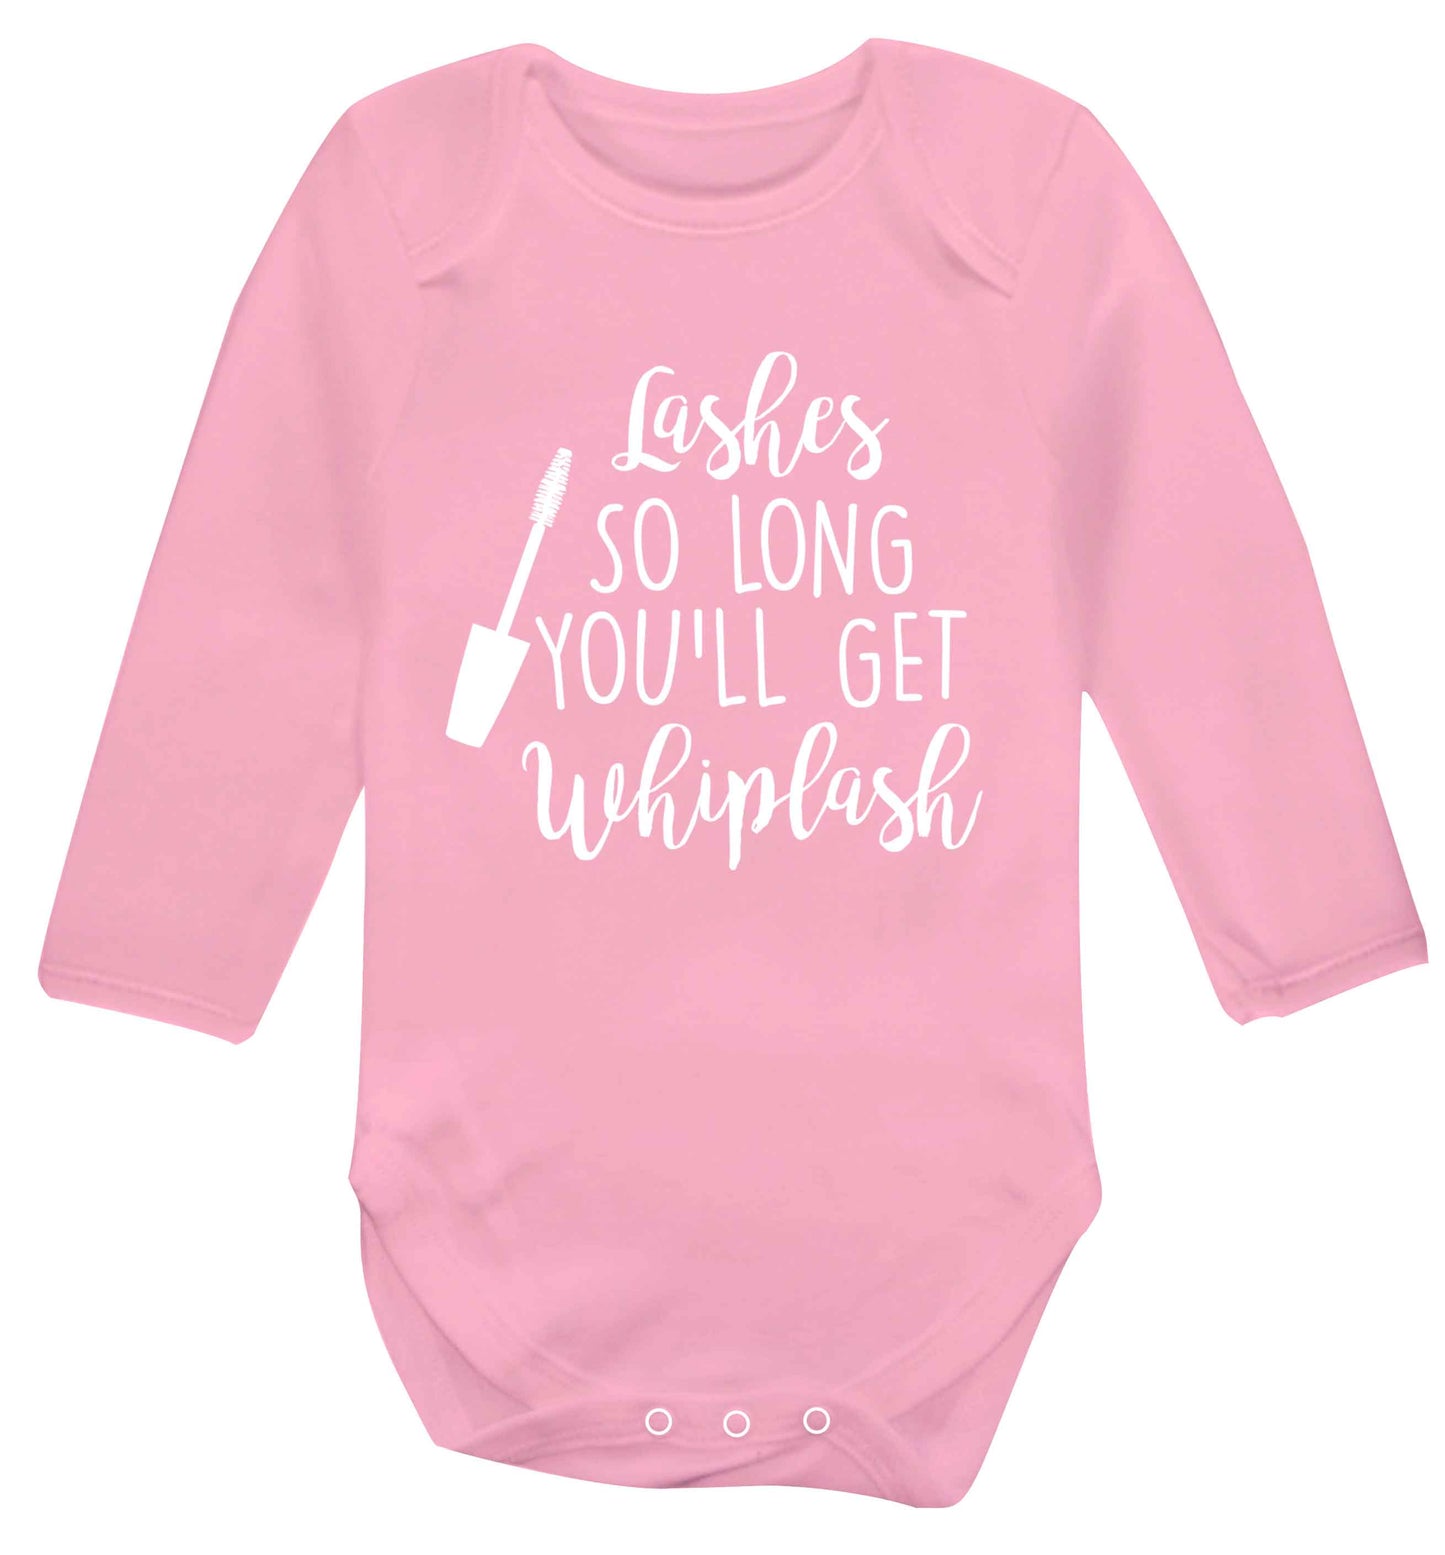 Lashes so long you'll get whiplash Baby Vest long sleeved pale pink 6-12 months